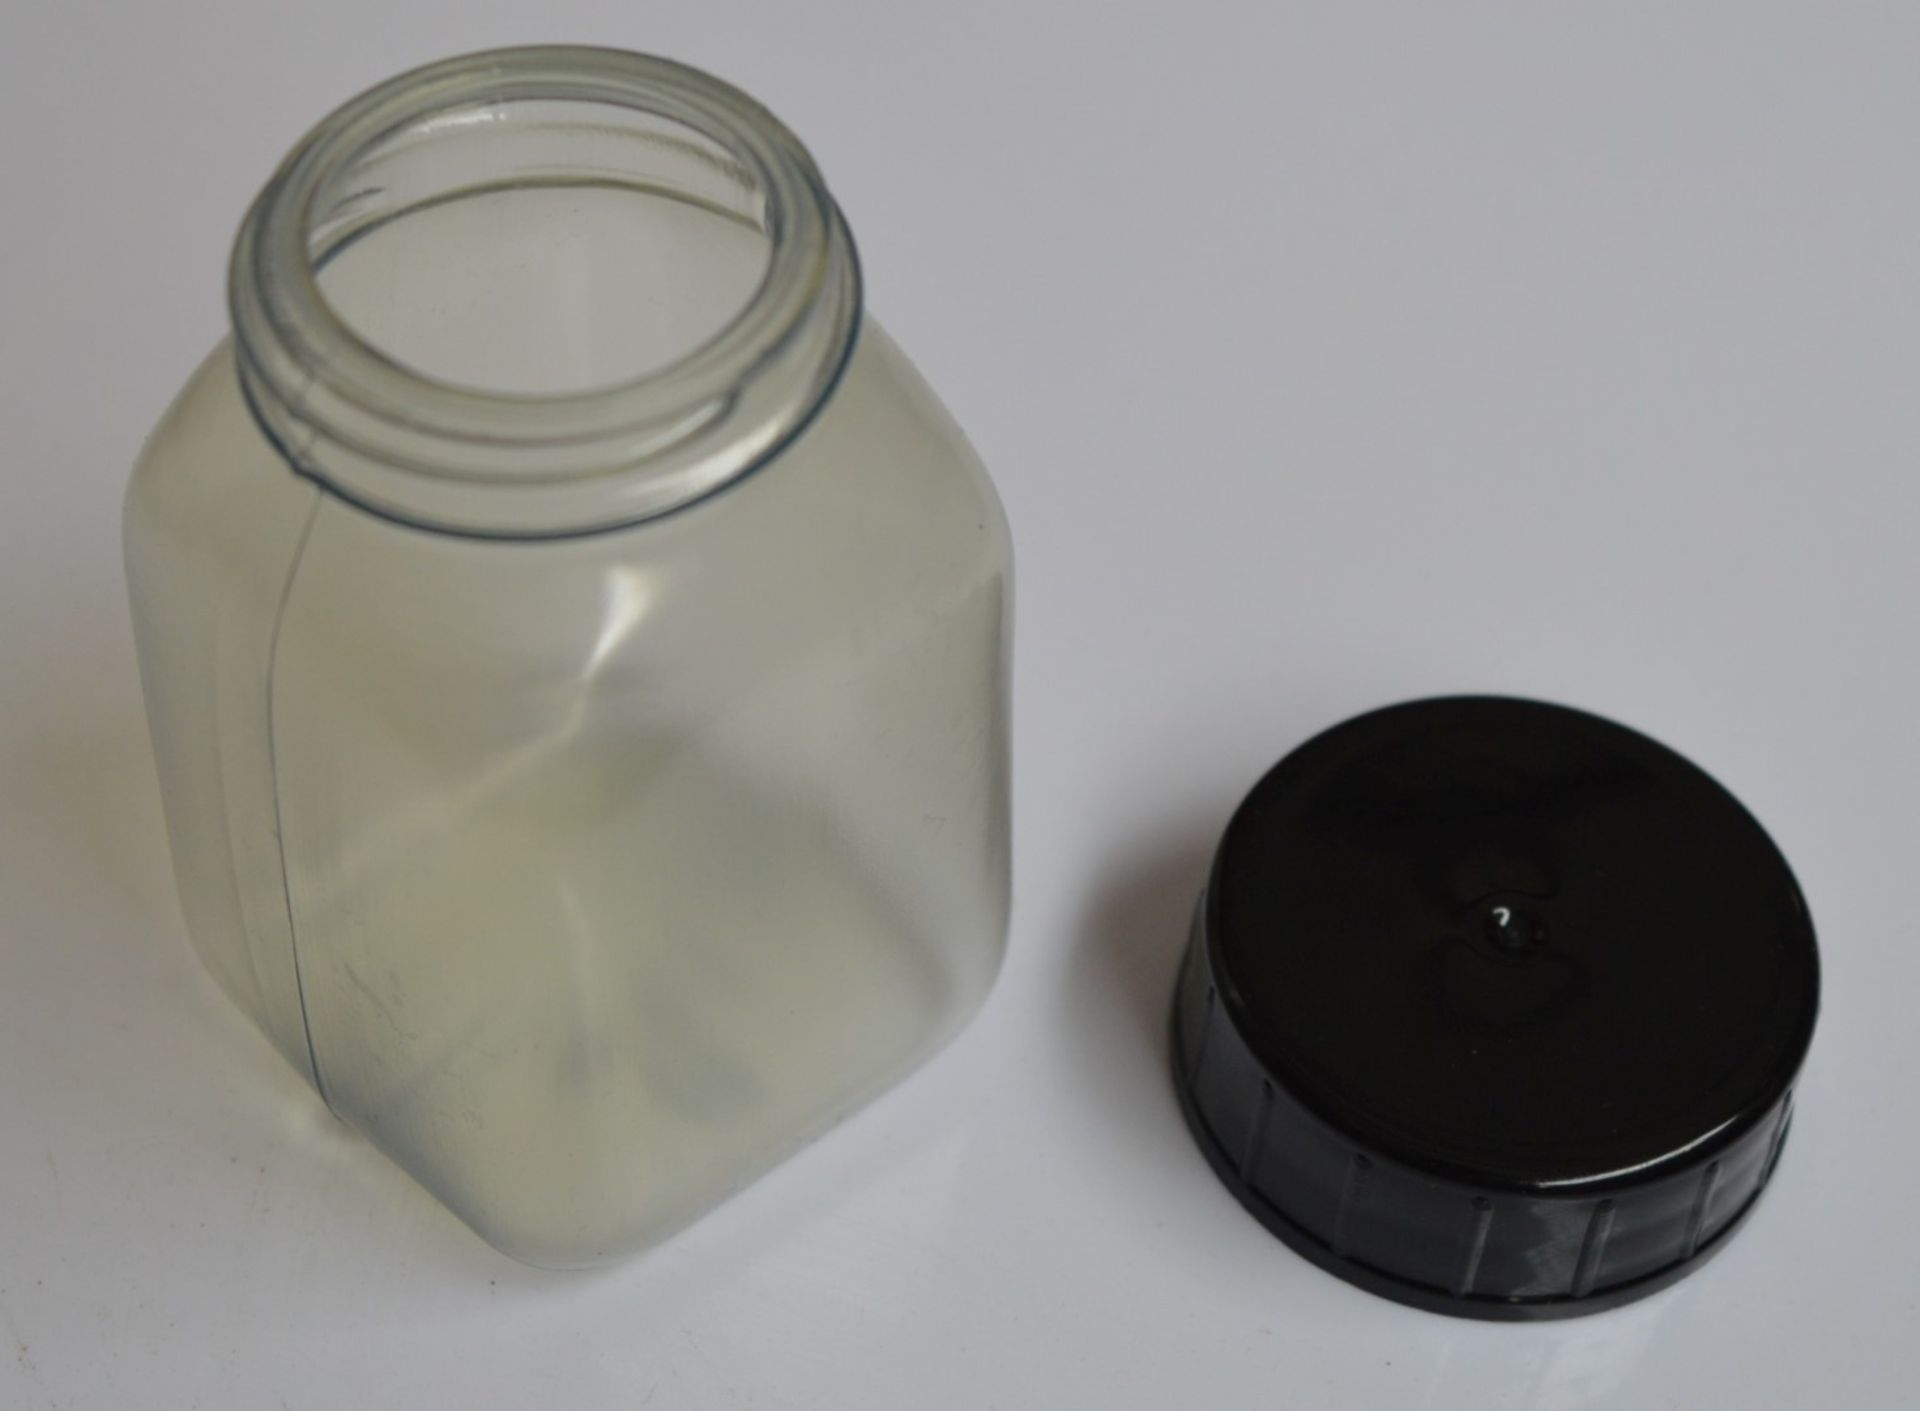 100 x Wide Neck Container Bottles With Leakproof Lids and PE Foam Inserts - 50ml Capacity - 38. - Image 5 of 6